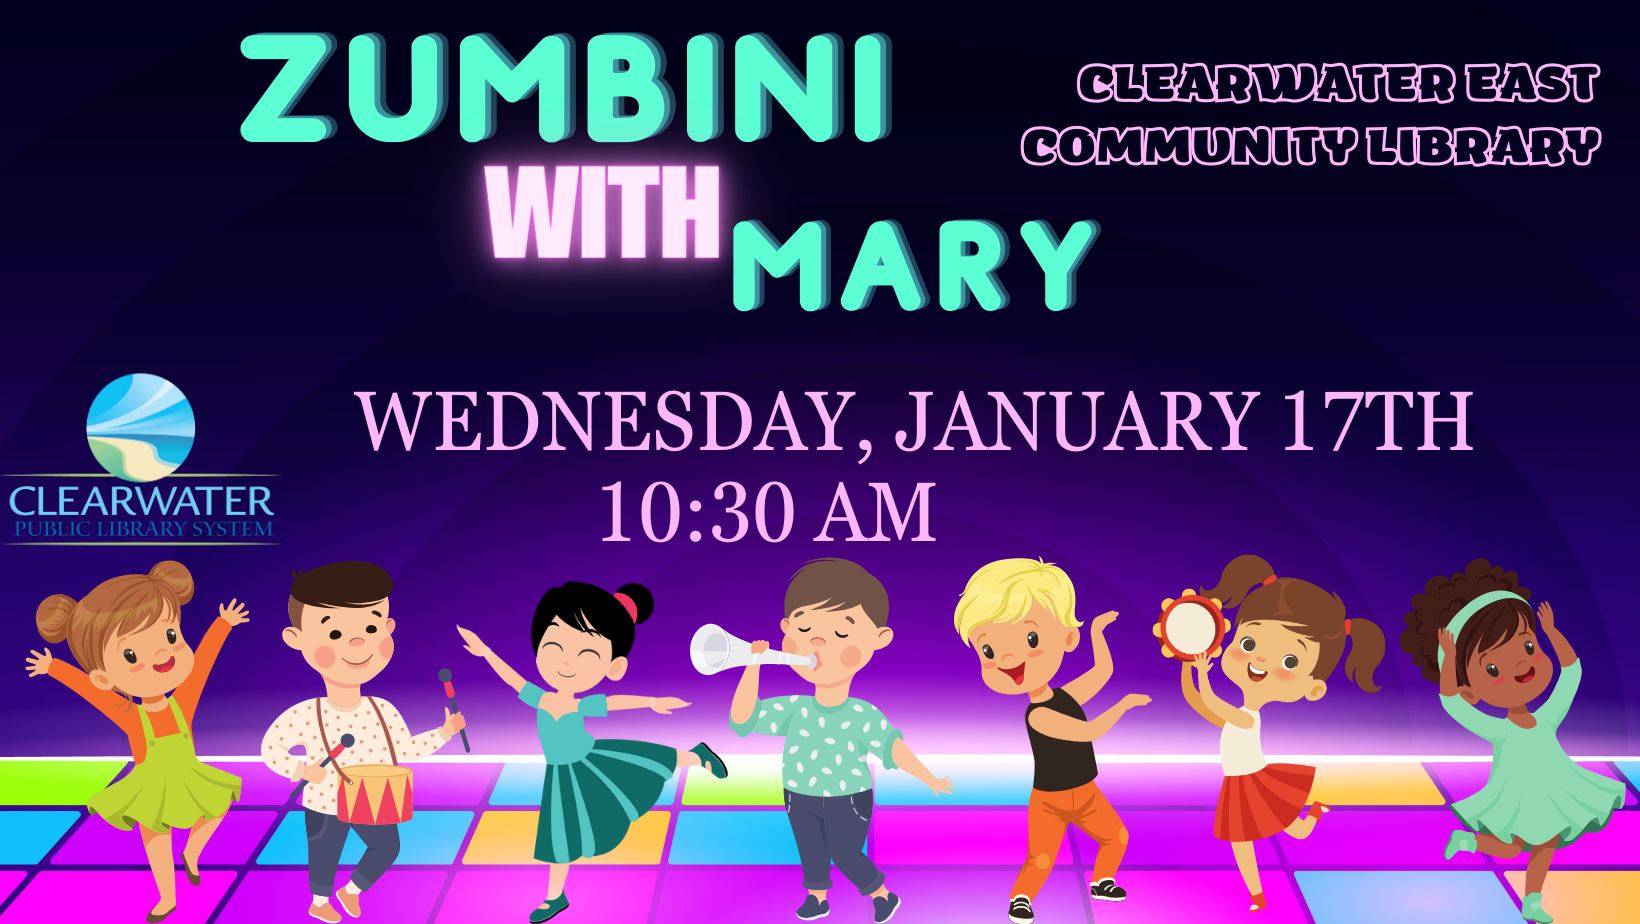 Zumbini with Mary, Wednesday January 17th, Children on dance floor dancing different styles of dance